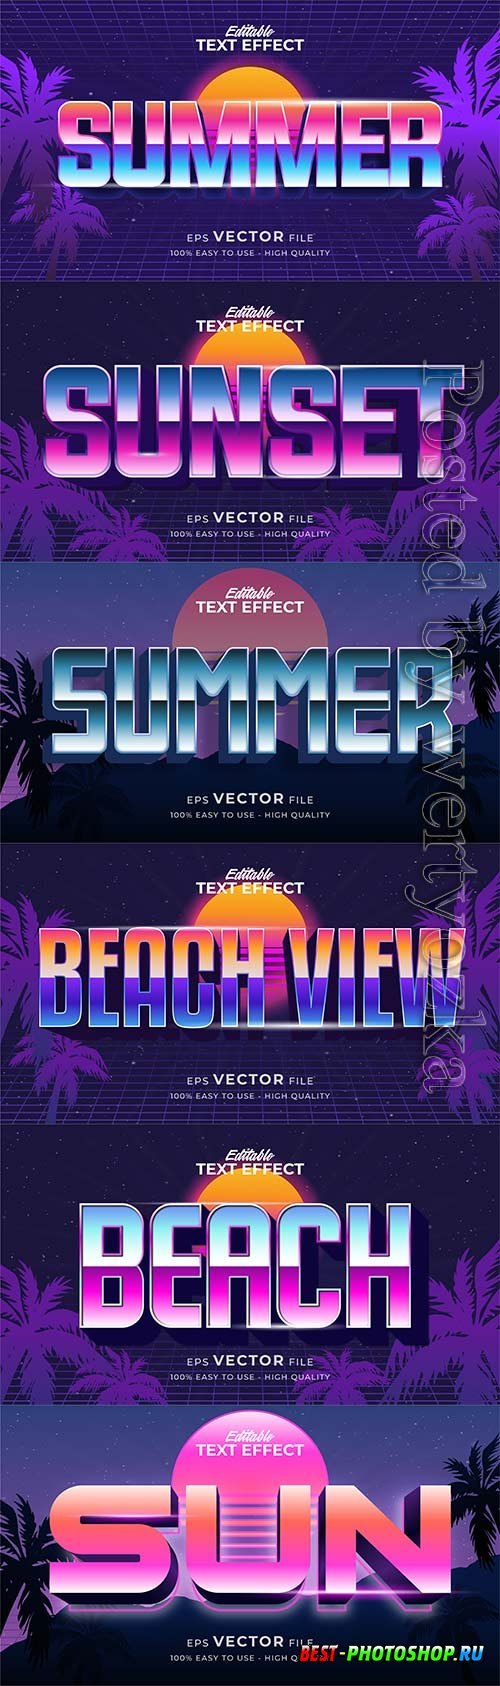 Text style effect, retro summer text in grunge style vol 4